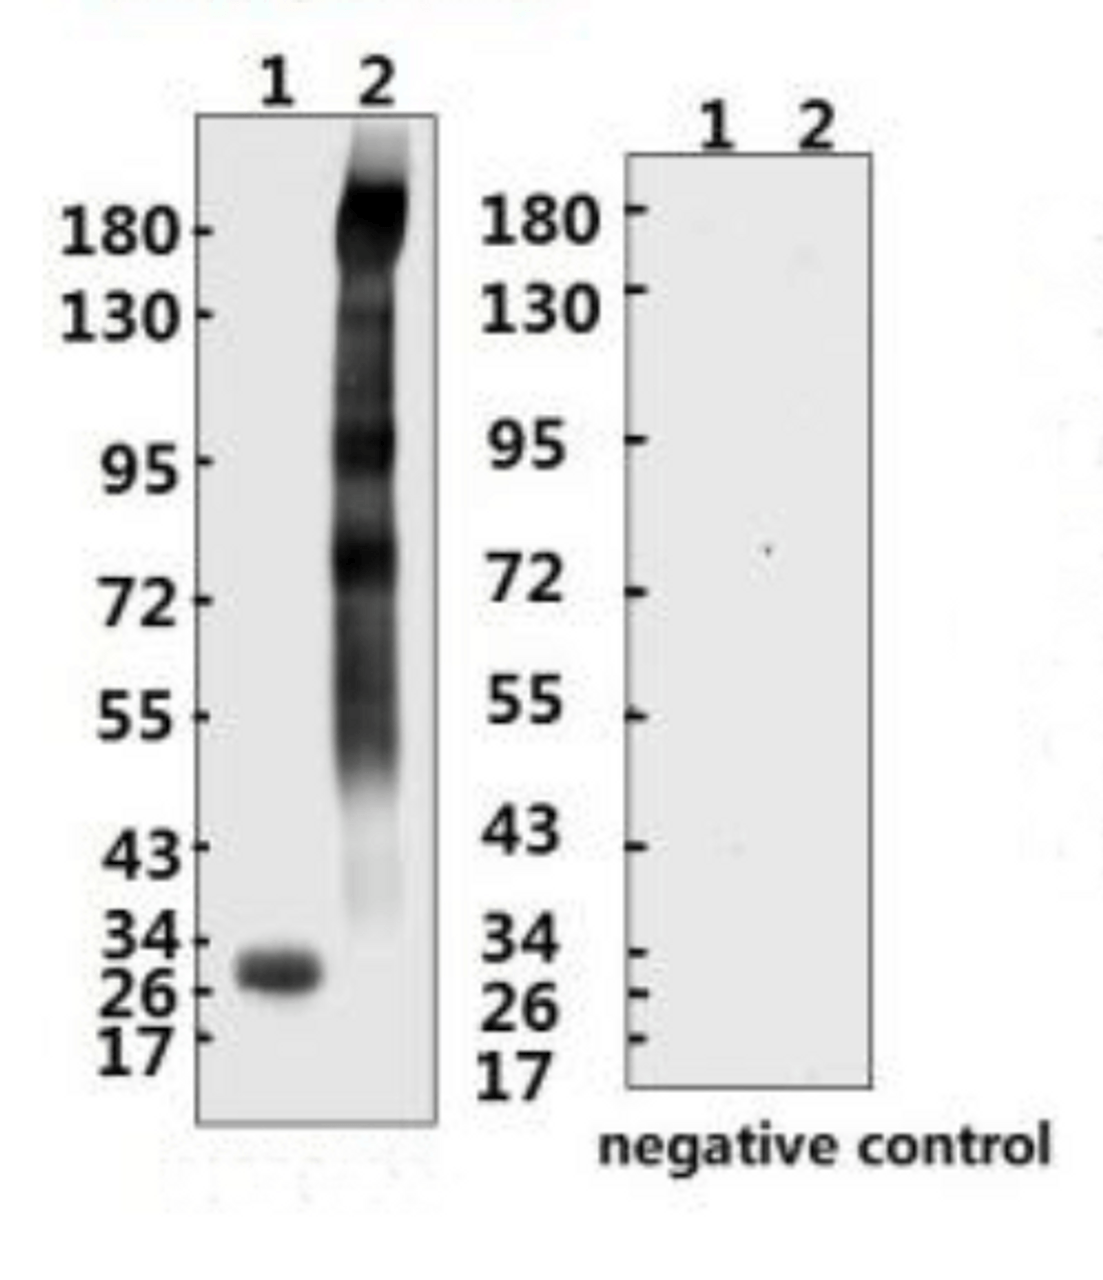 <strong>Figure 1 Western Blot Validation with Recombinant Protein</strong><br>Loading: 1ug of recombinant protein per lane. Lane 1: 10-008, Lane 2: 10-011 Antibodies: SARS-CoV-2 (COVID-19) Spike ECD, 10-528, 1:2000. Secondary: Goat anti-rabbit IgG HRP conjugate at 1:20000 dilution.